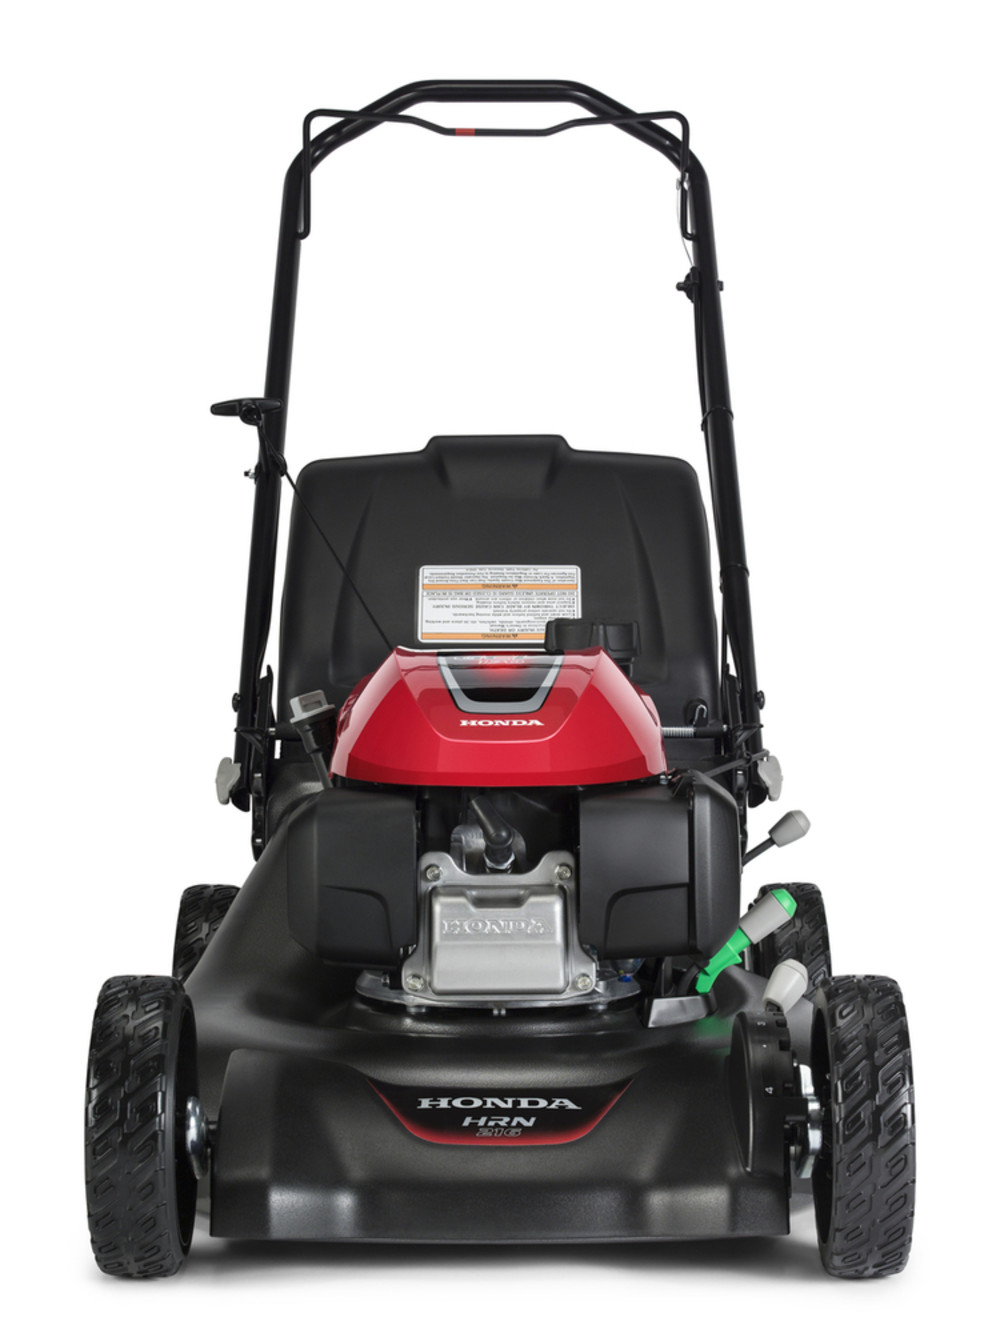 Honda 21 In. Steel Deck 3-in-1 Push Lawn Mower with GCV170 Engine and Auto Choke HRN216PKA from Honda